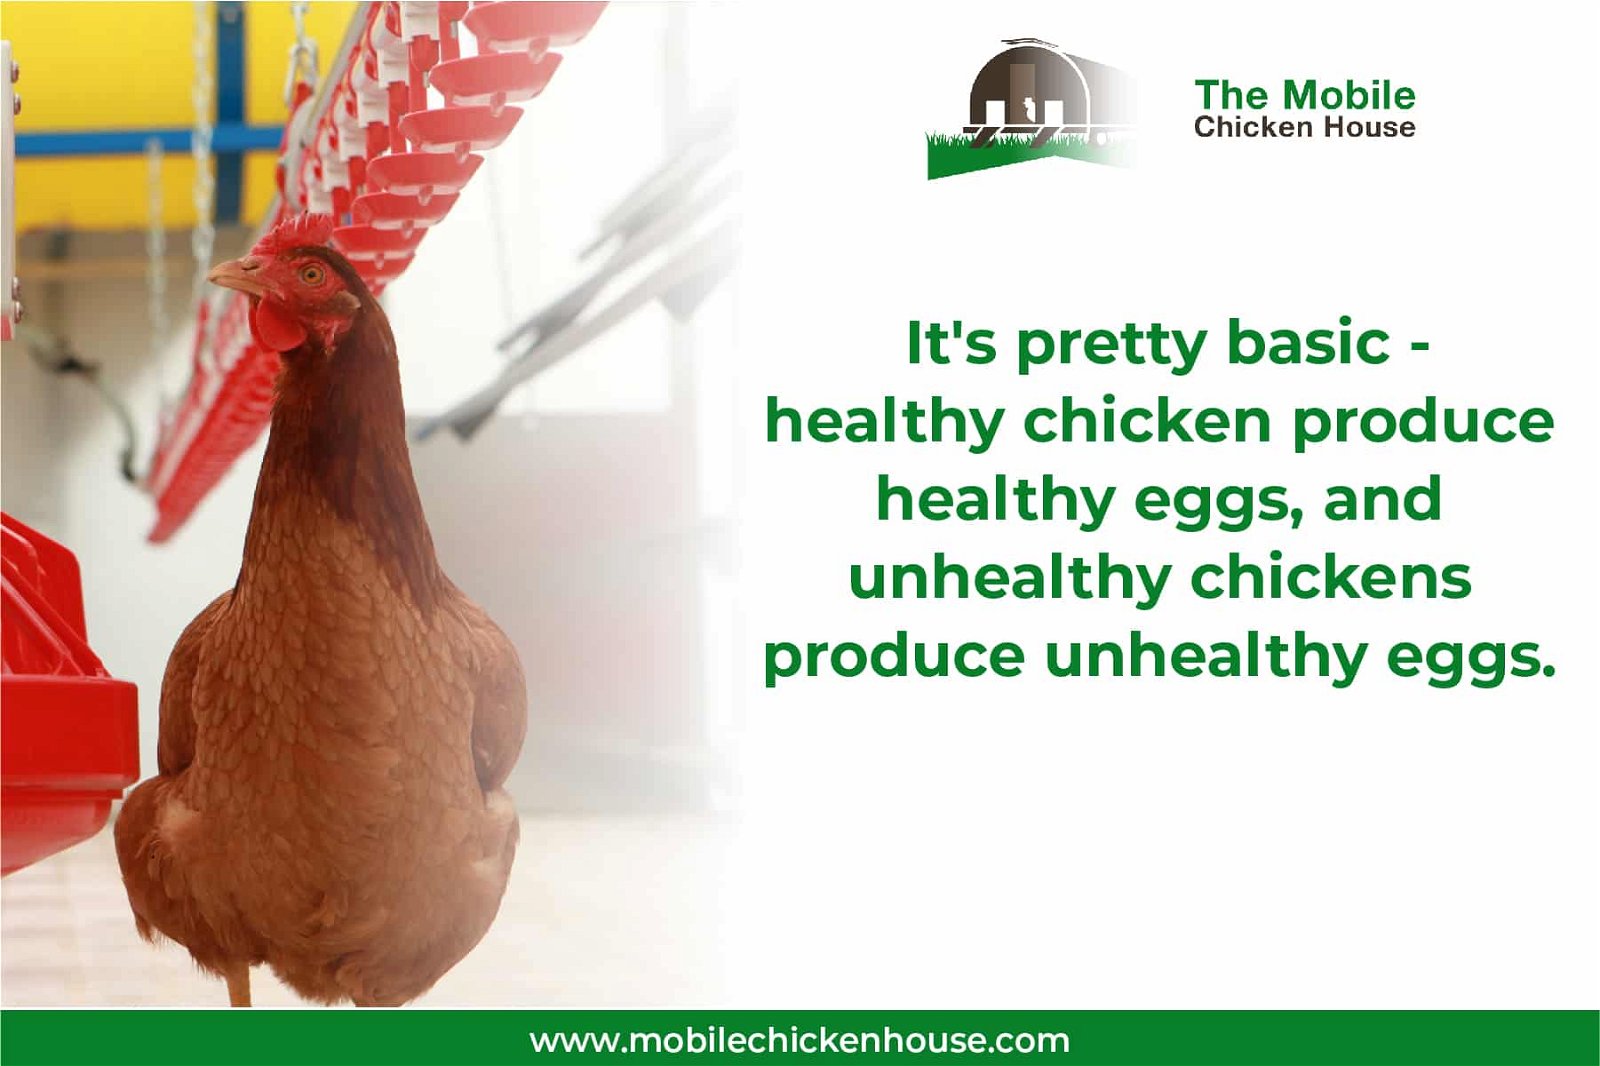 it's simple: healthy chickens produce healthy eggs